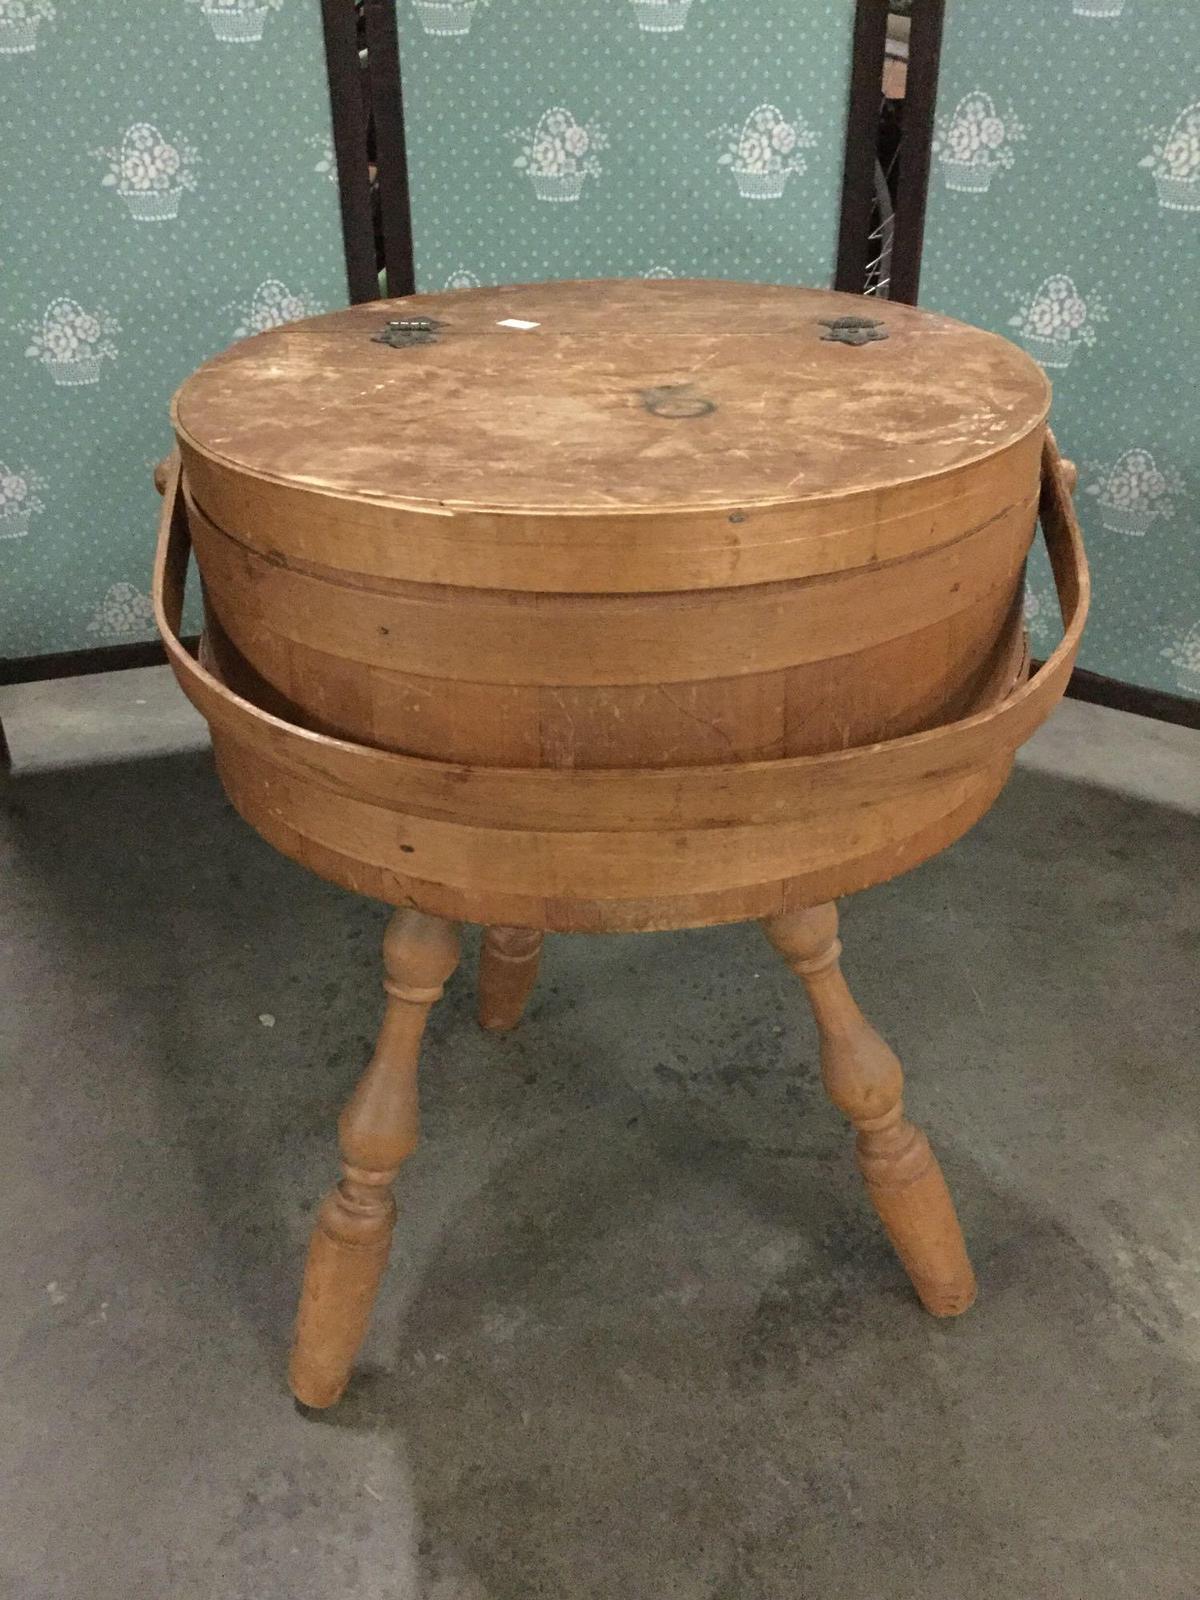 Antique wooden flip top storage / picnic basket made into a stool / table